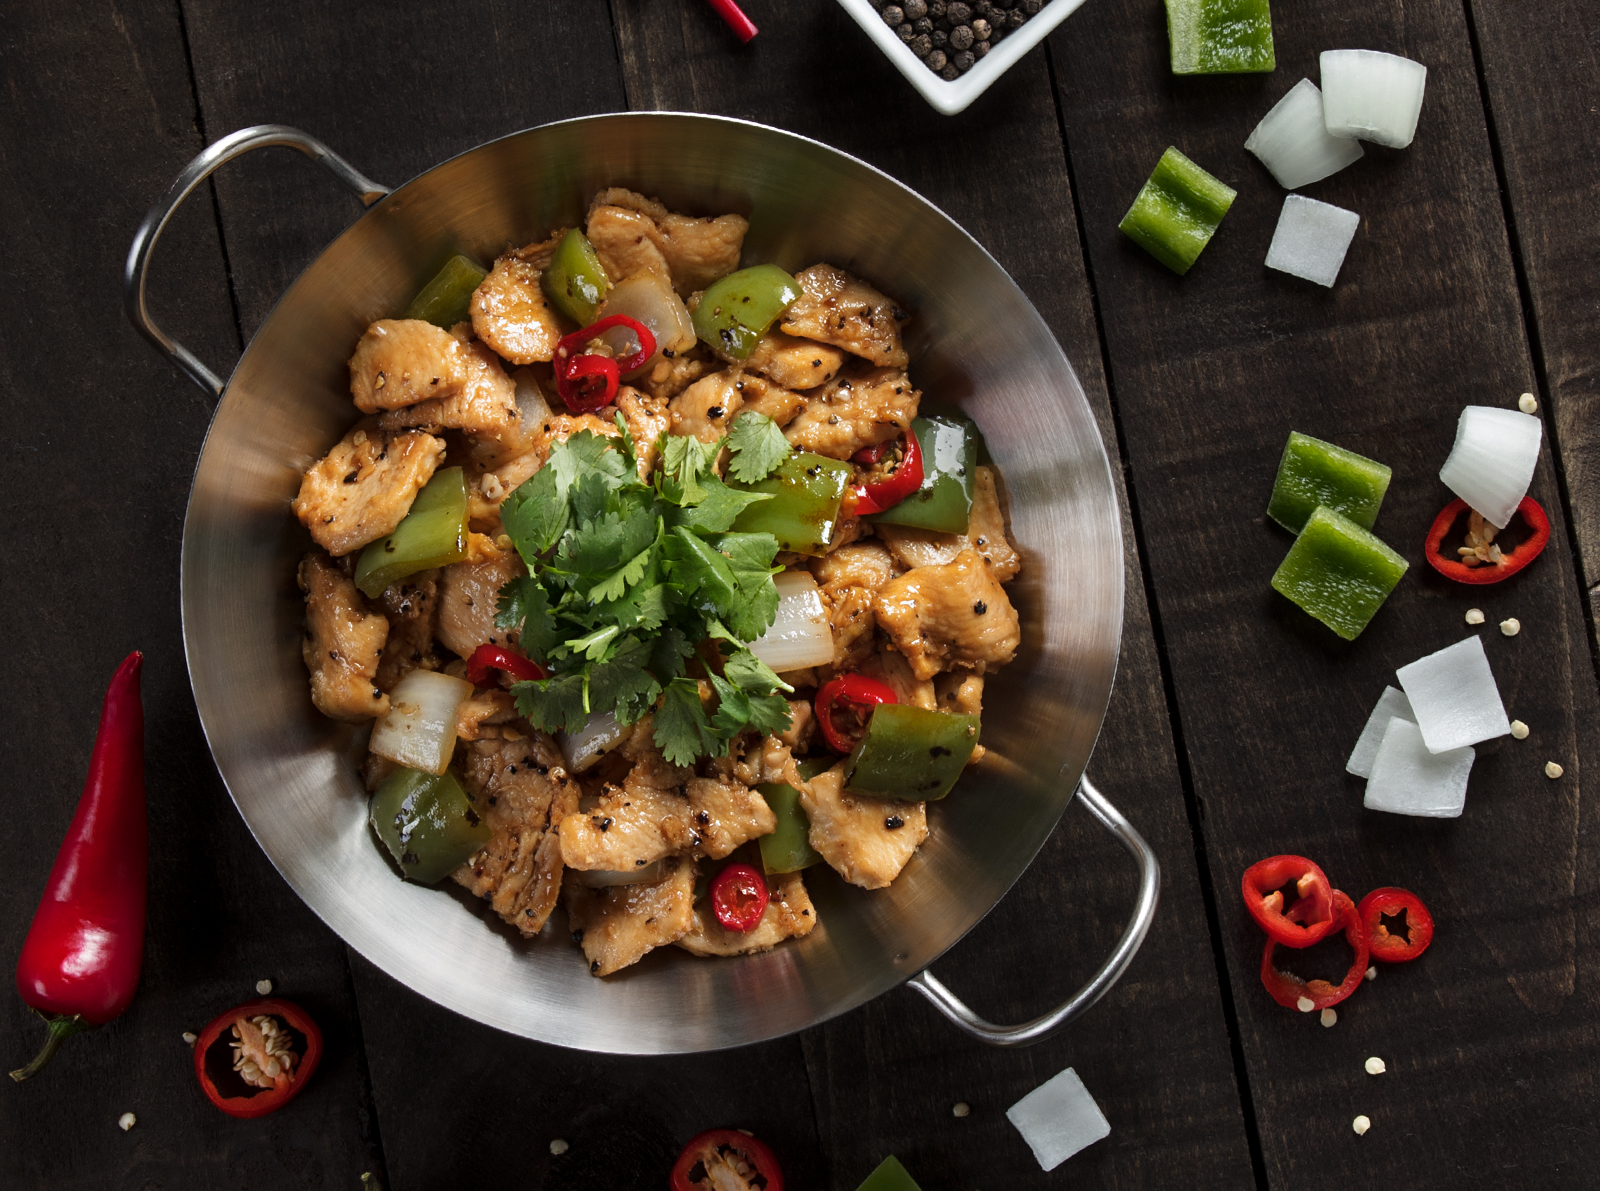 P.F. Chang’s: Buy one entrée, get one FREE